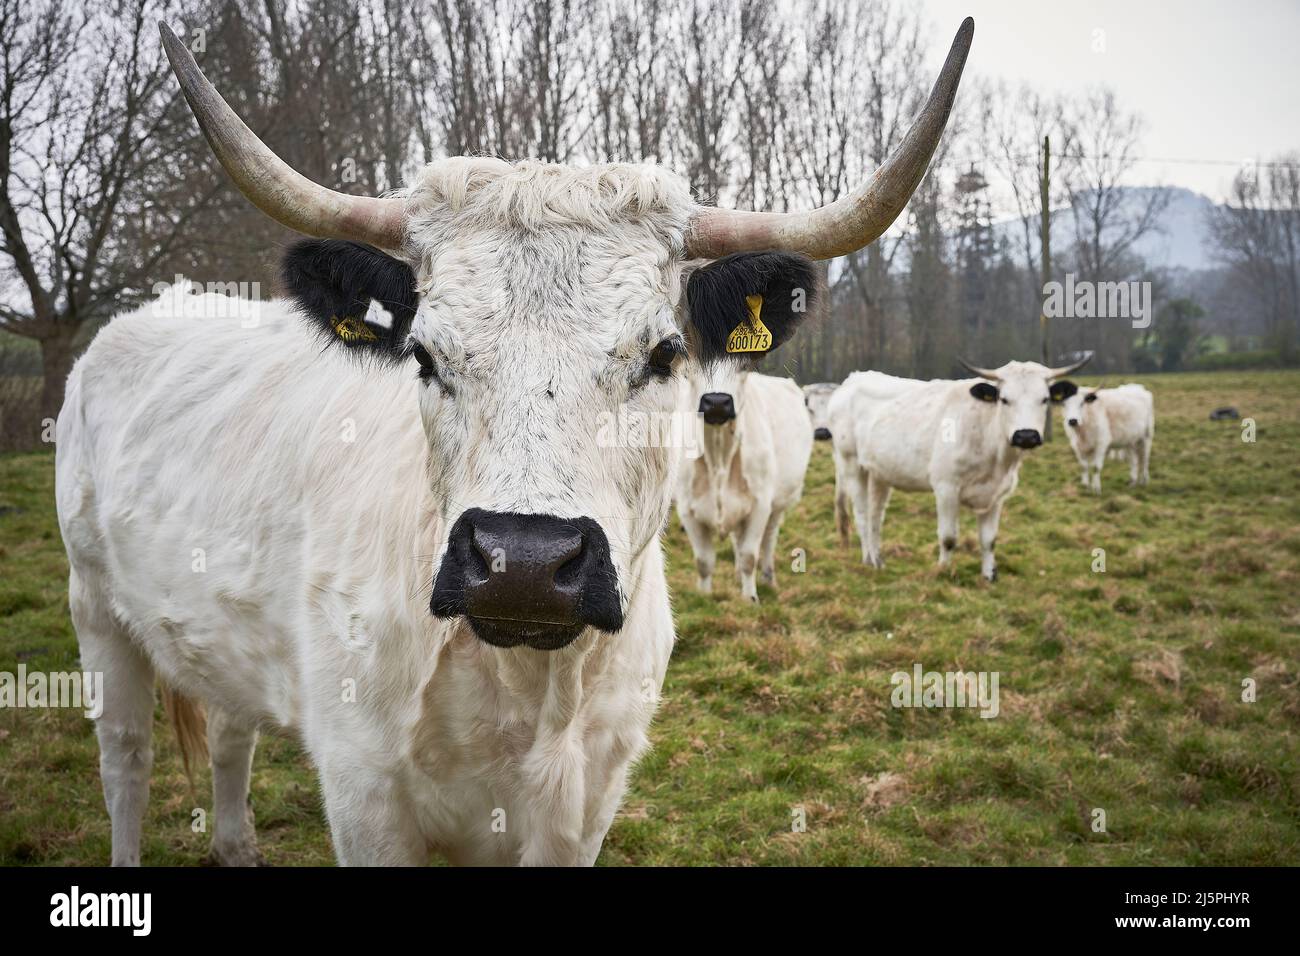 White Park Cattle Rare Breed close up in field Stock Photo